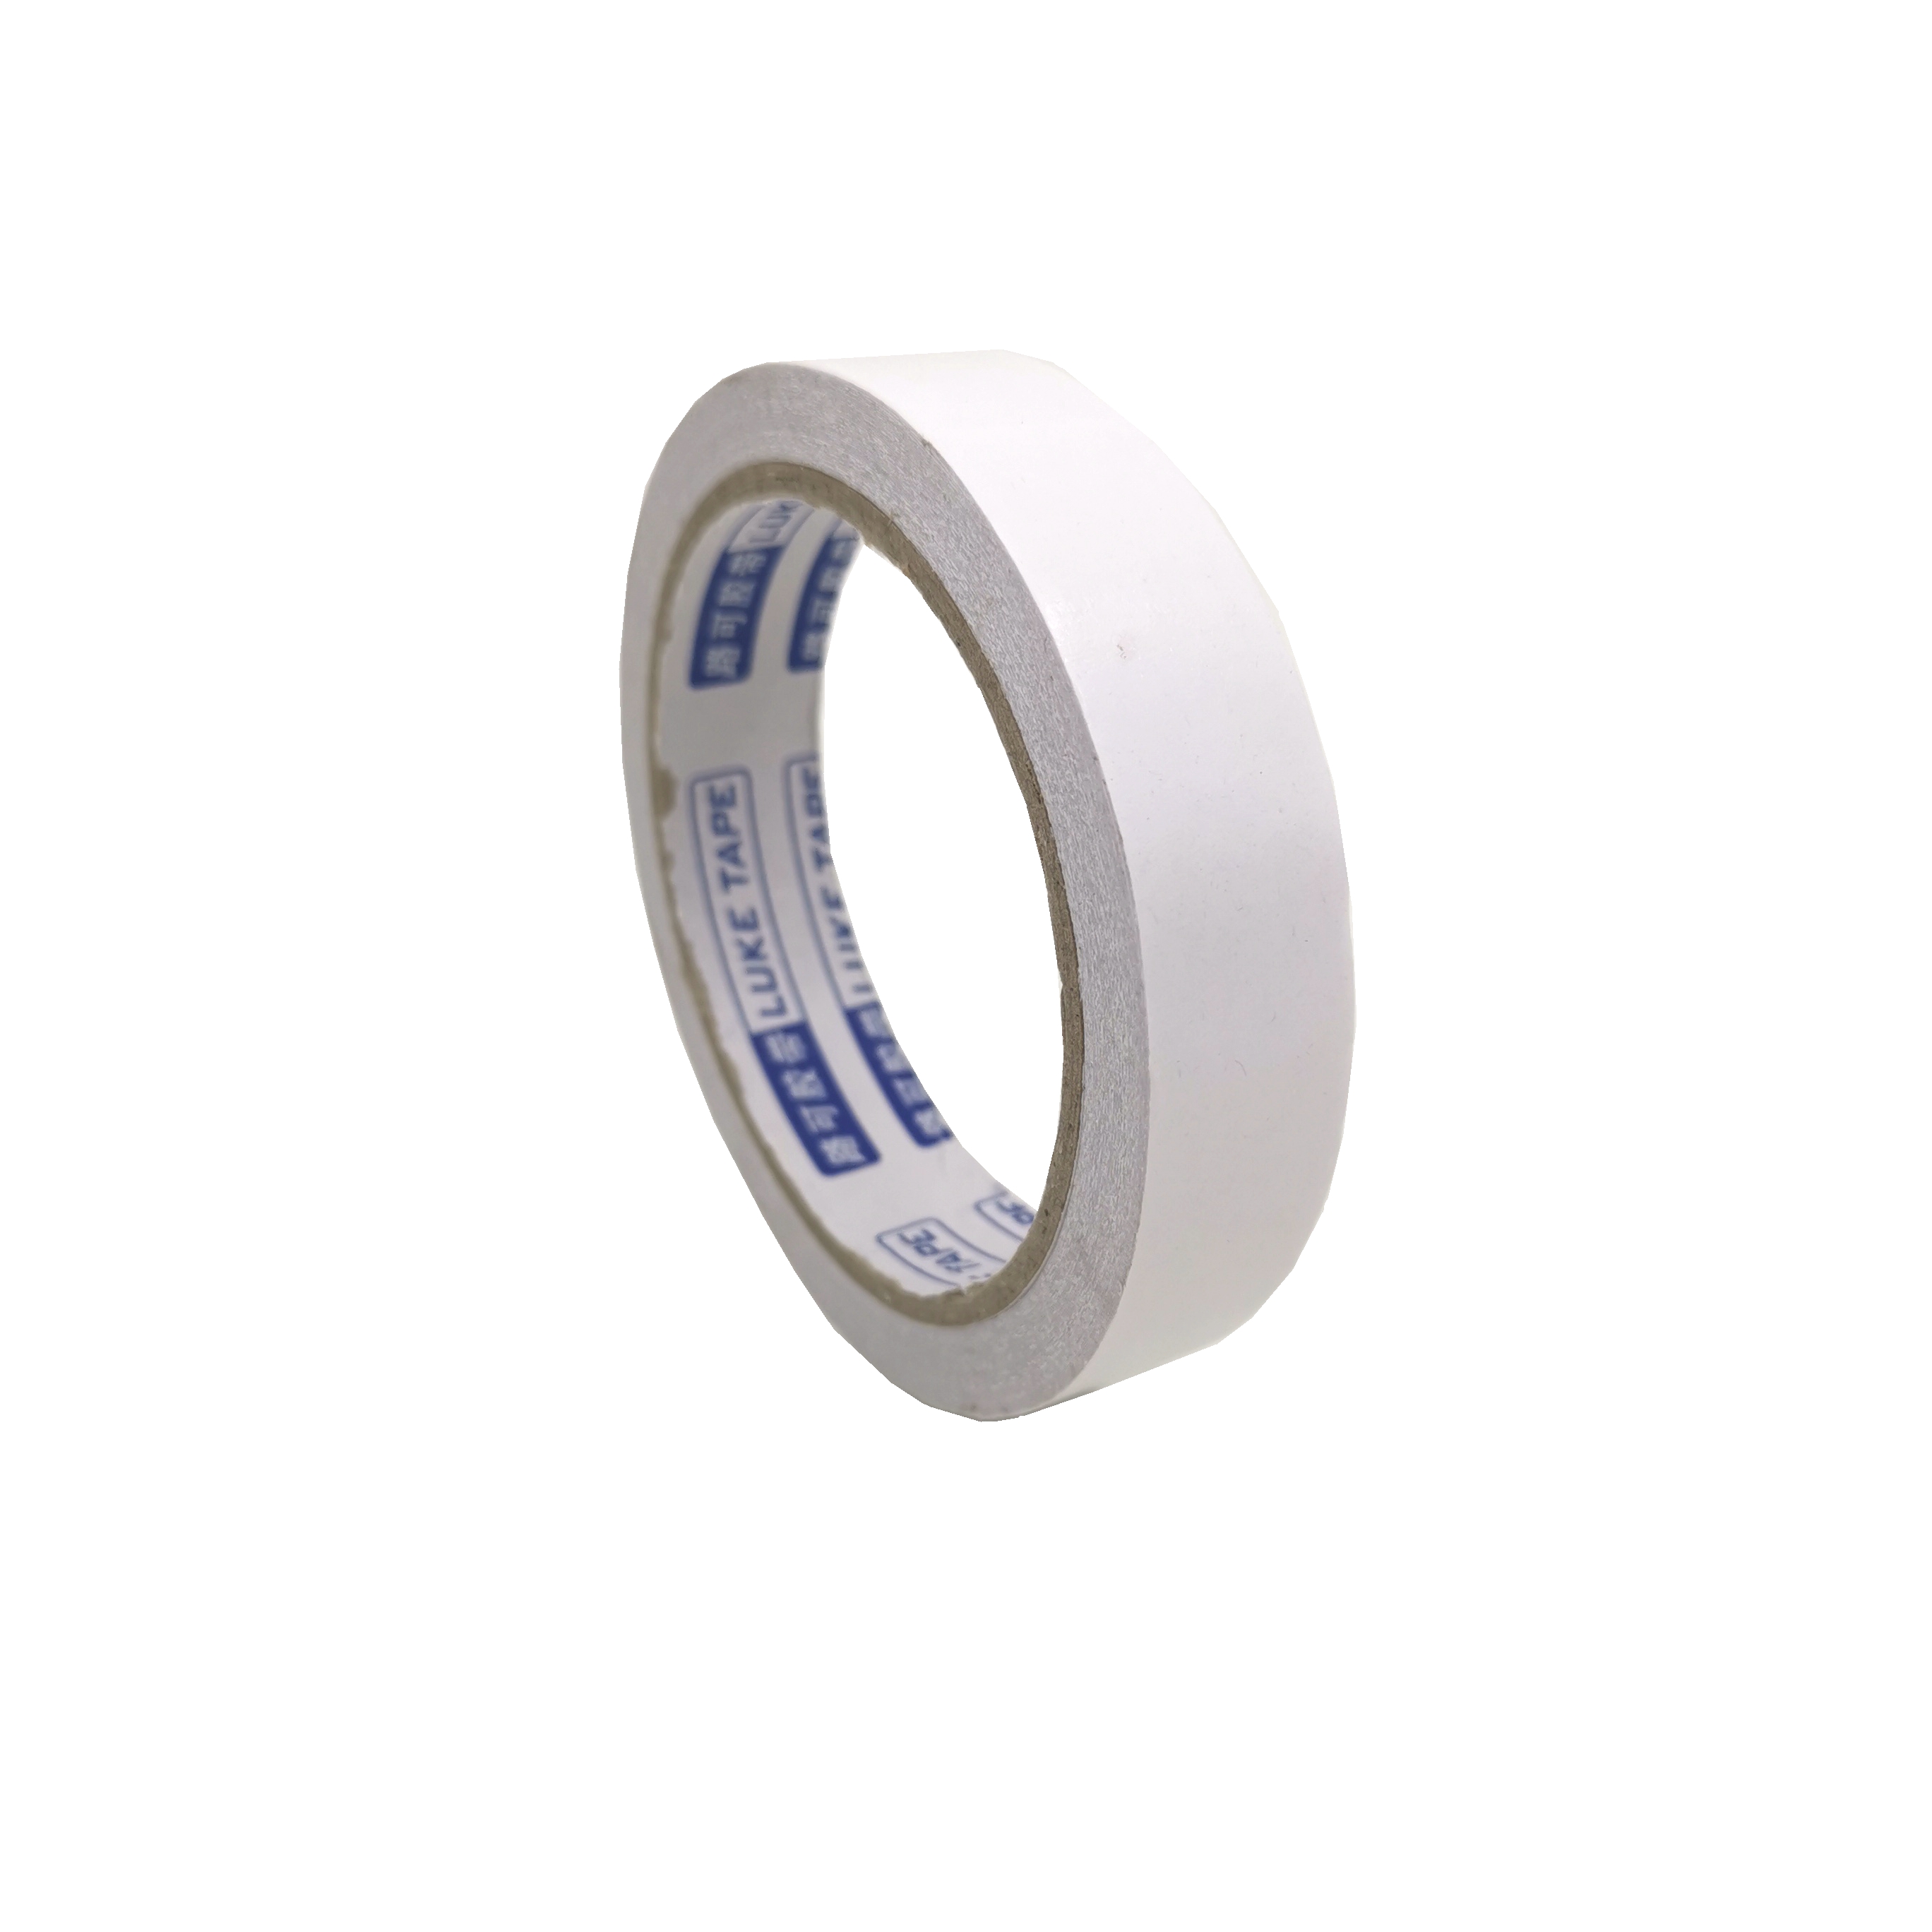 double sided adhesive tape